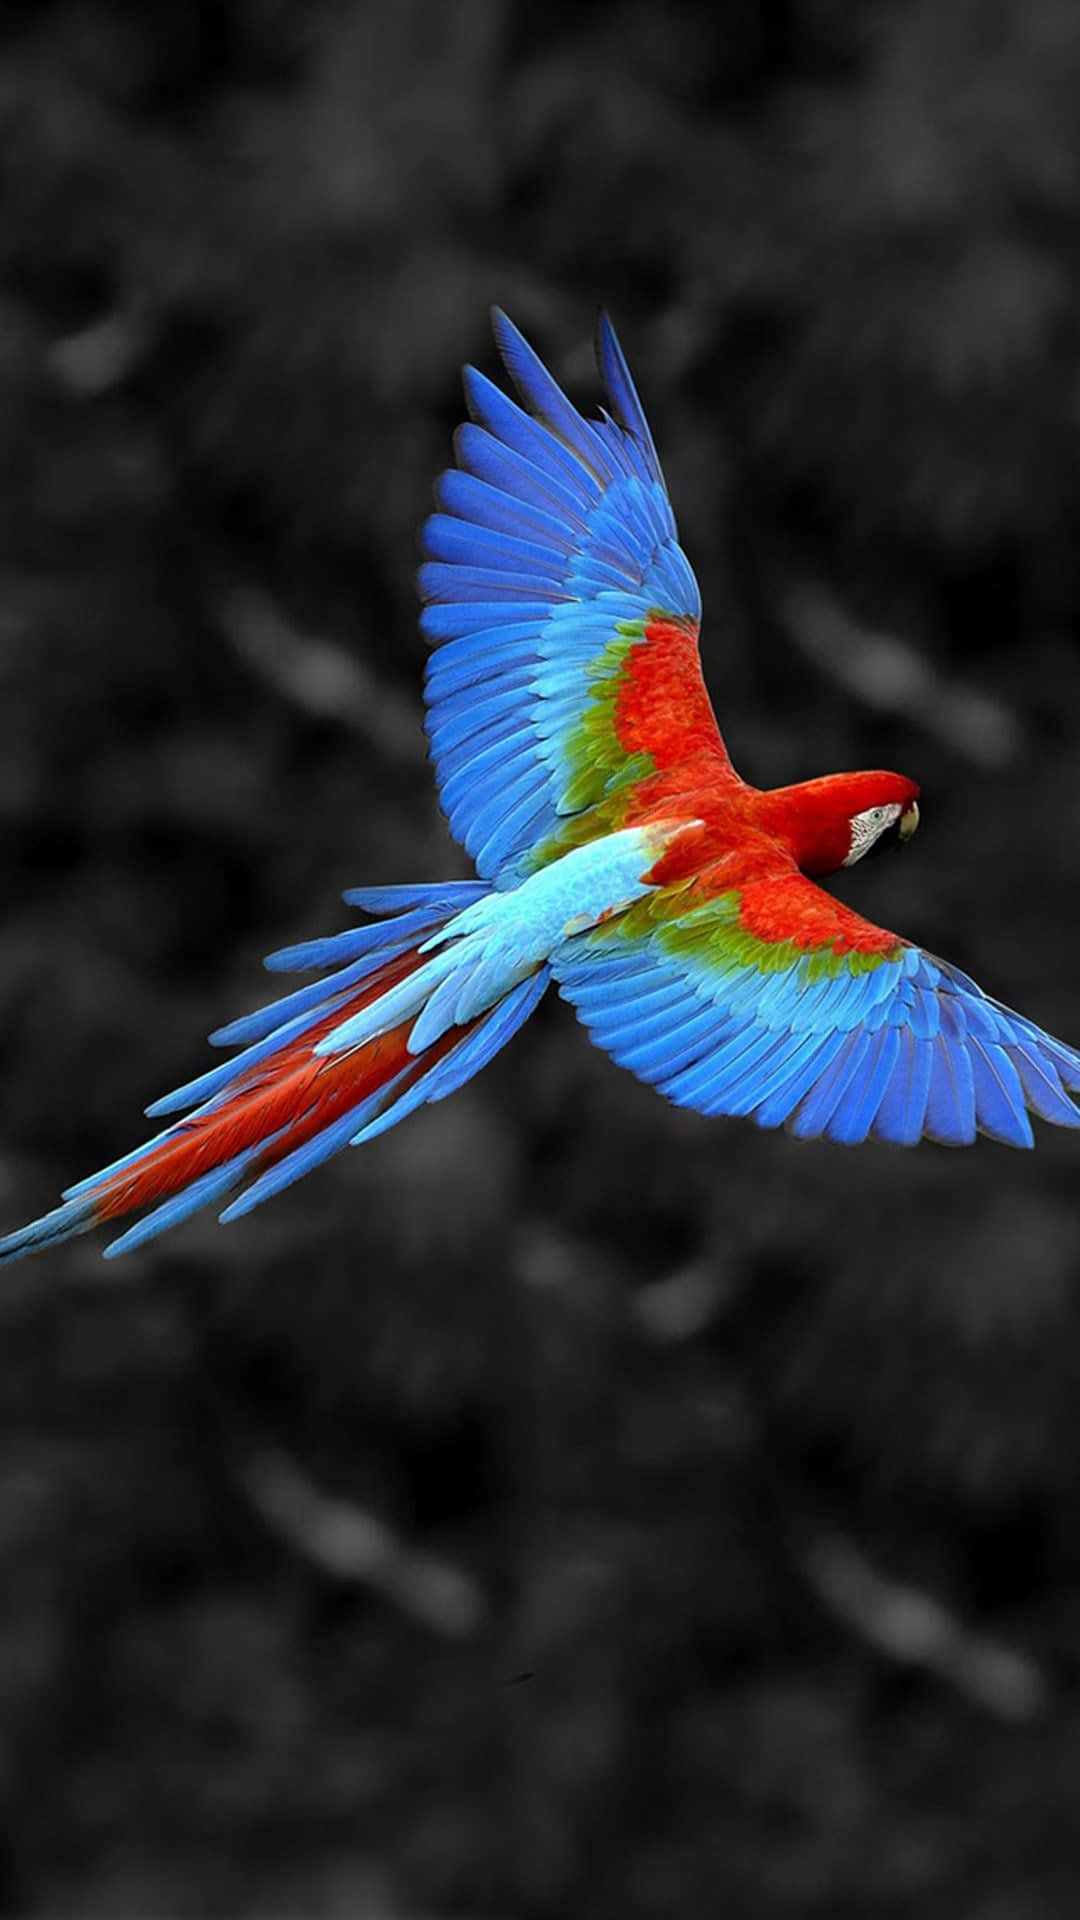 Beautiful Background Image Of A Bird With Stunning Colors And Standing On  Branch Photo | JPG Free Download - Pikbest